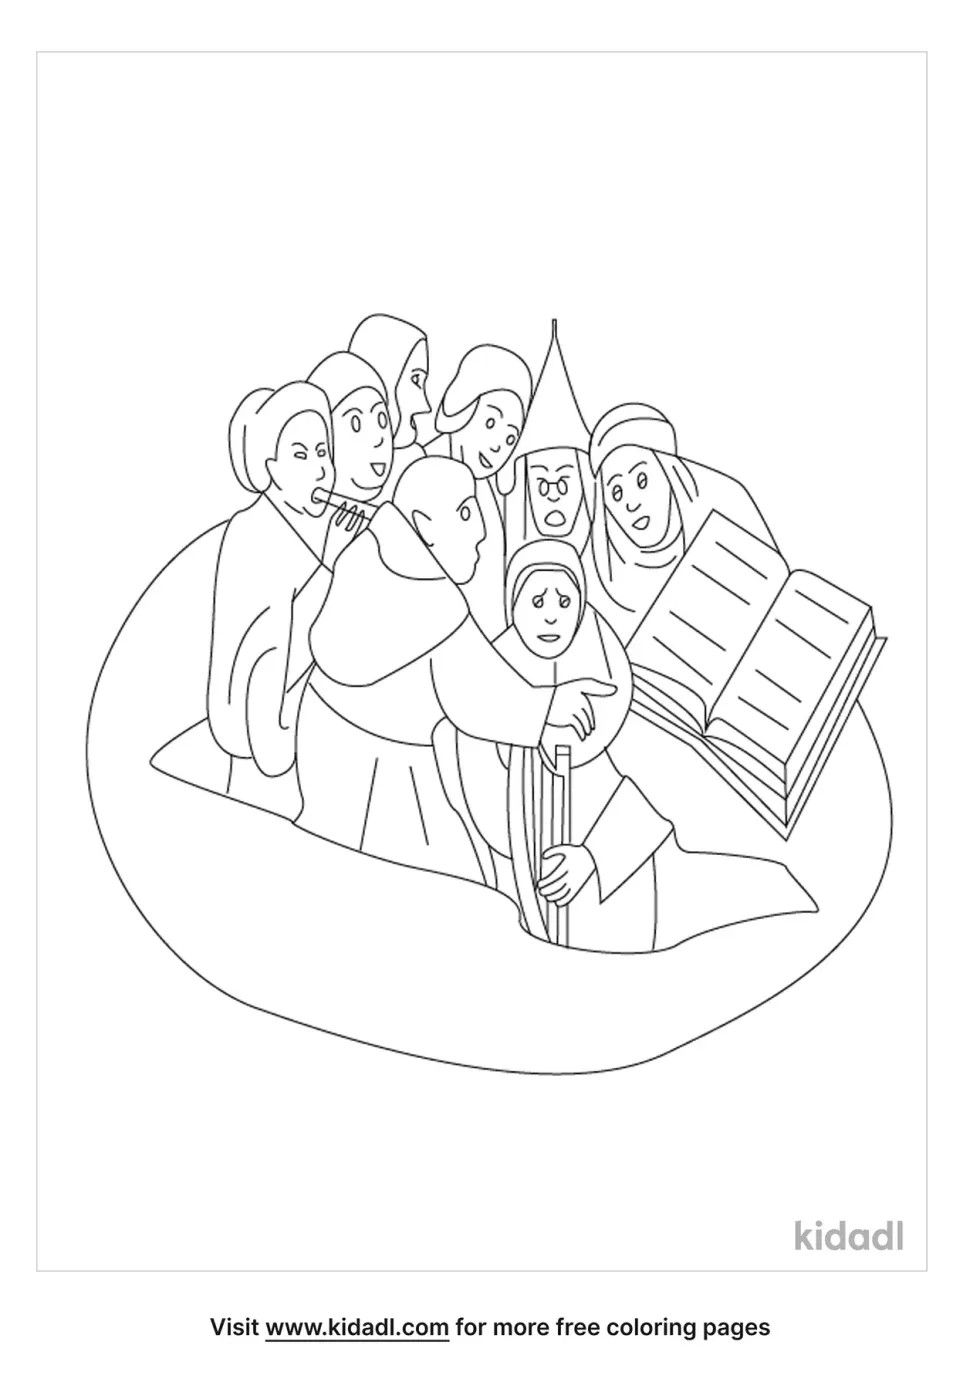 Bosch Coloring Page